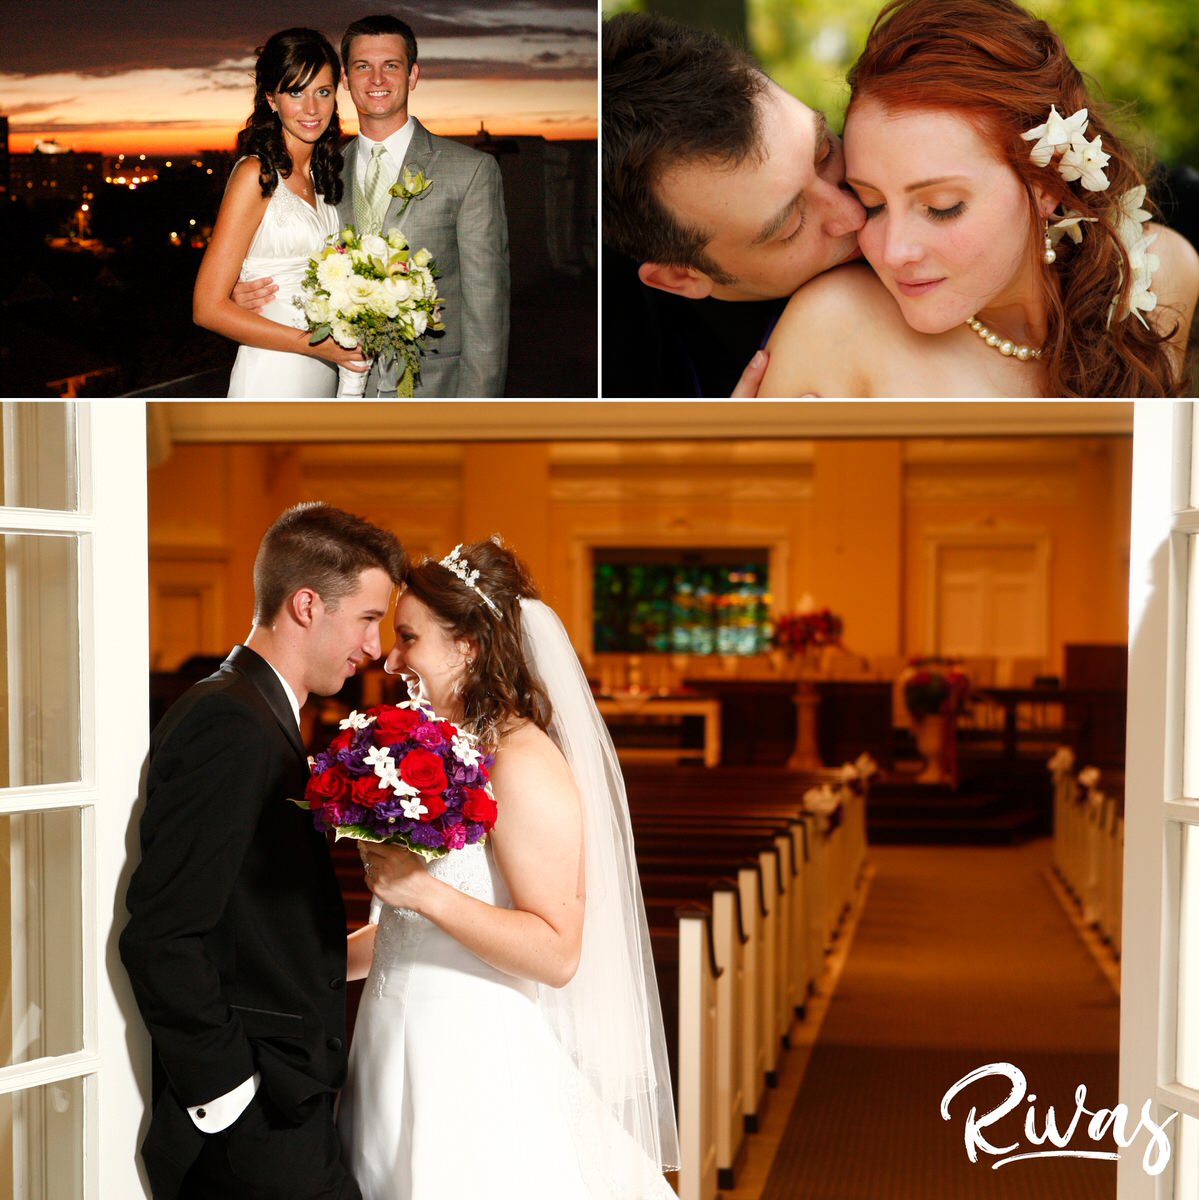 10 Years | Three photos of three brides and grooms, each on their wedding day, sharing a loving embrace with their new spouse.